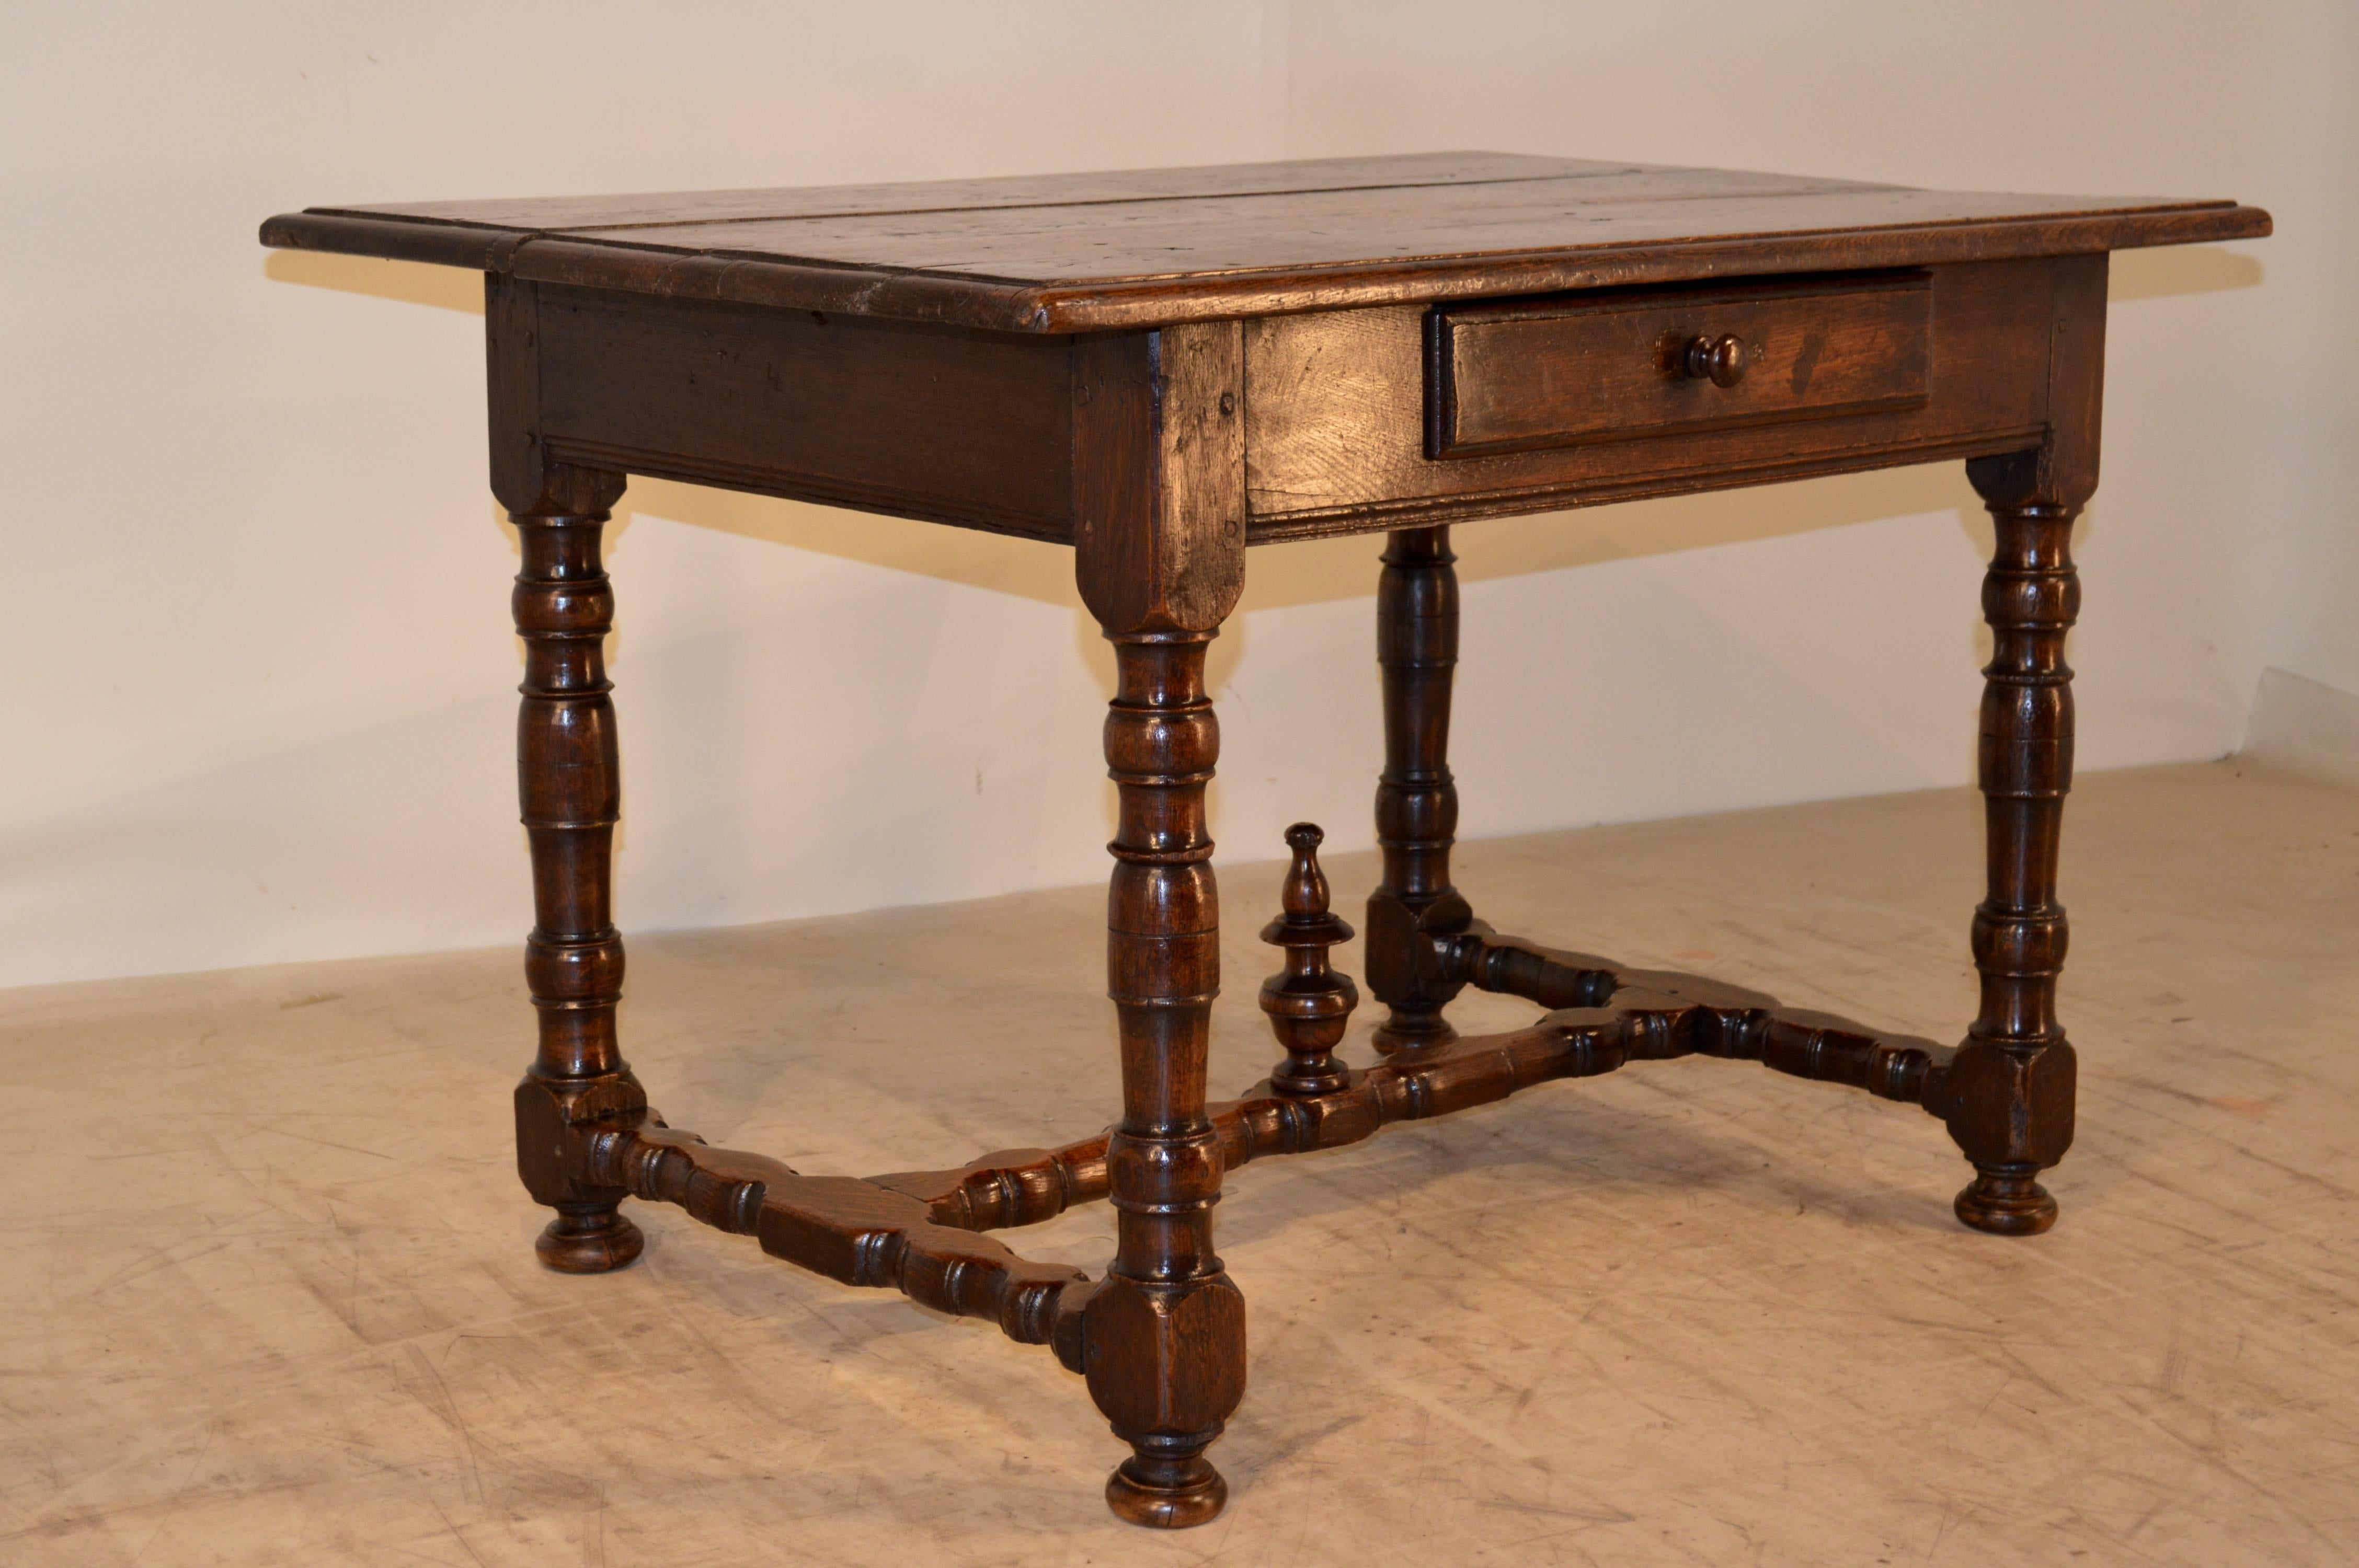 Early 18th century French oak library table. The top is made up of three planks, and has a beveled edge around the top. It has a simple apron containing one drawer and is supported on hand-turned legs, which are joined by hand-turned stretchers,